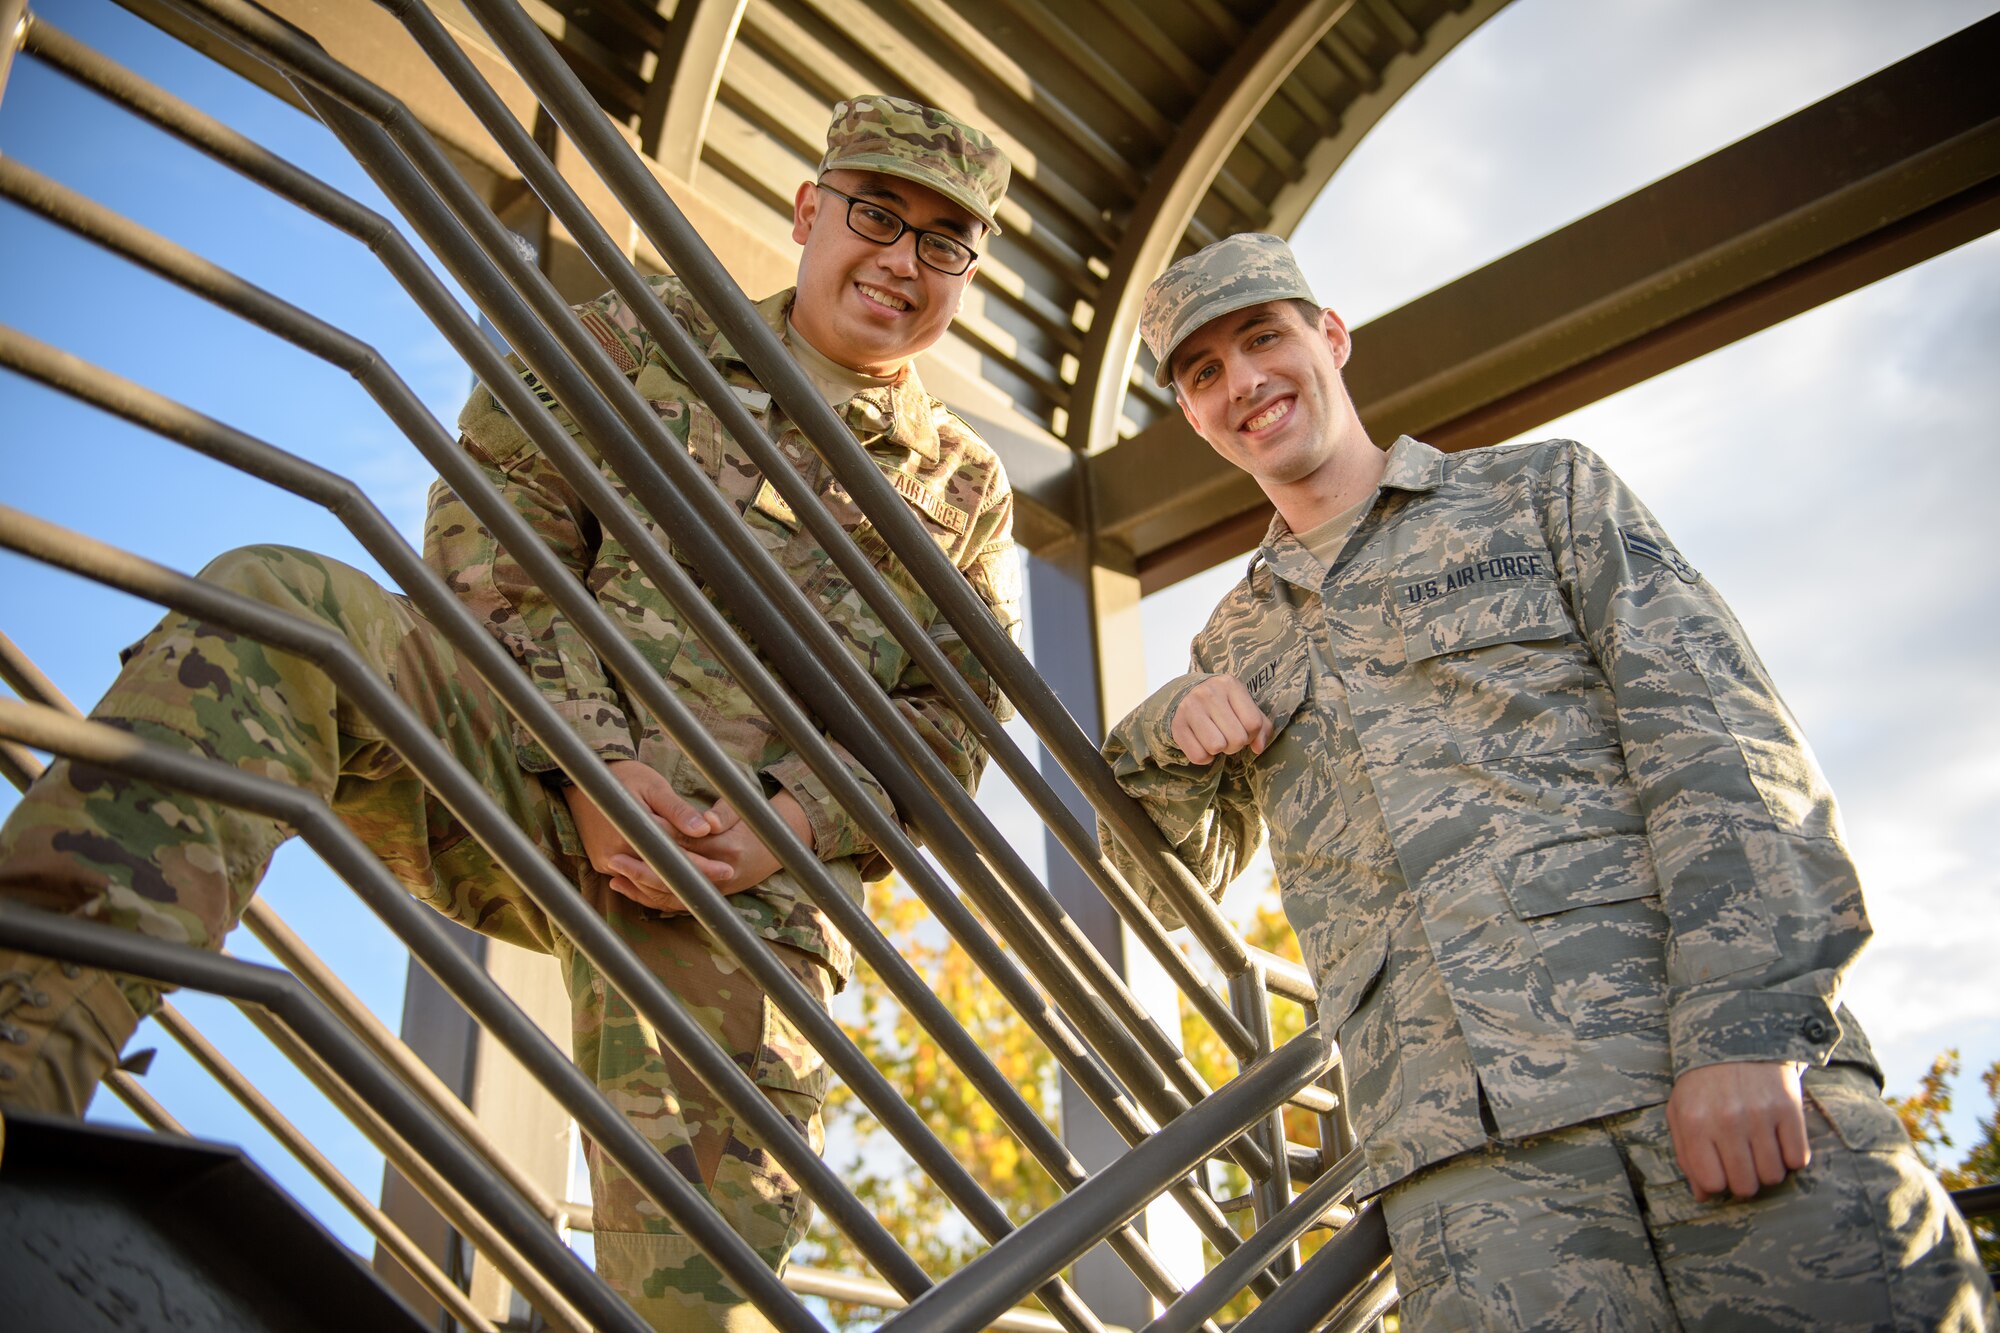 Airman 1st Class Christian Uy, left, and Airman 1st Class Andrew Snively pose for a photo on Oct. 29, 2018 at Hill Air Force Base, Utah. Uy and Snively both held successfull entry-level finance jobs before deciding to join the Air Force in 2017. They are two of the most financially experienced E-3s you're likely to run across in the military. (U.S. Air Force photo by R. Nial Bradshaw)